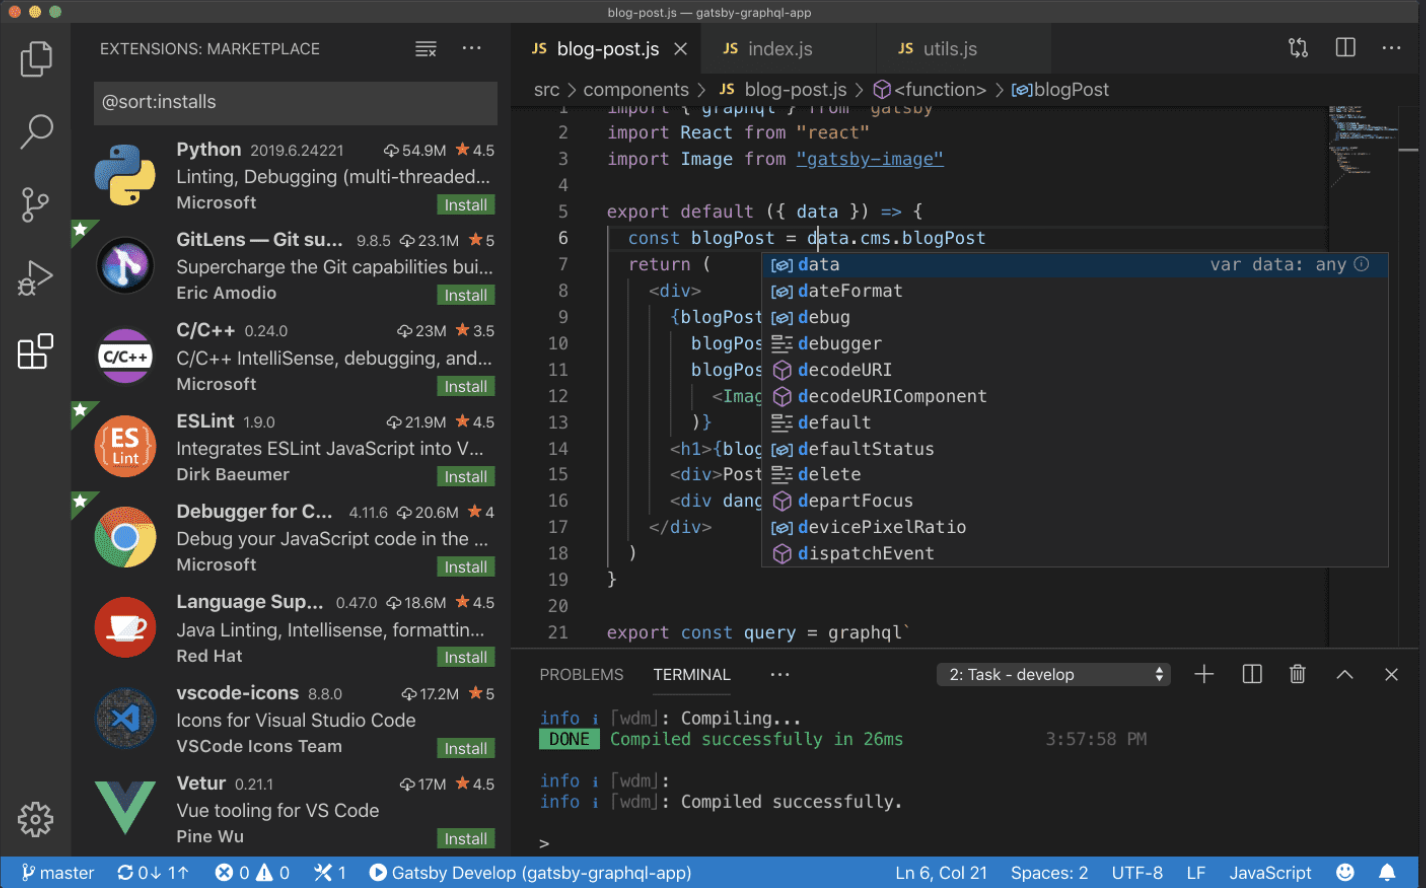 VS Code with the extension menu open